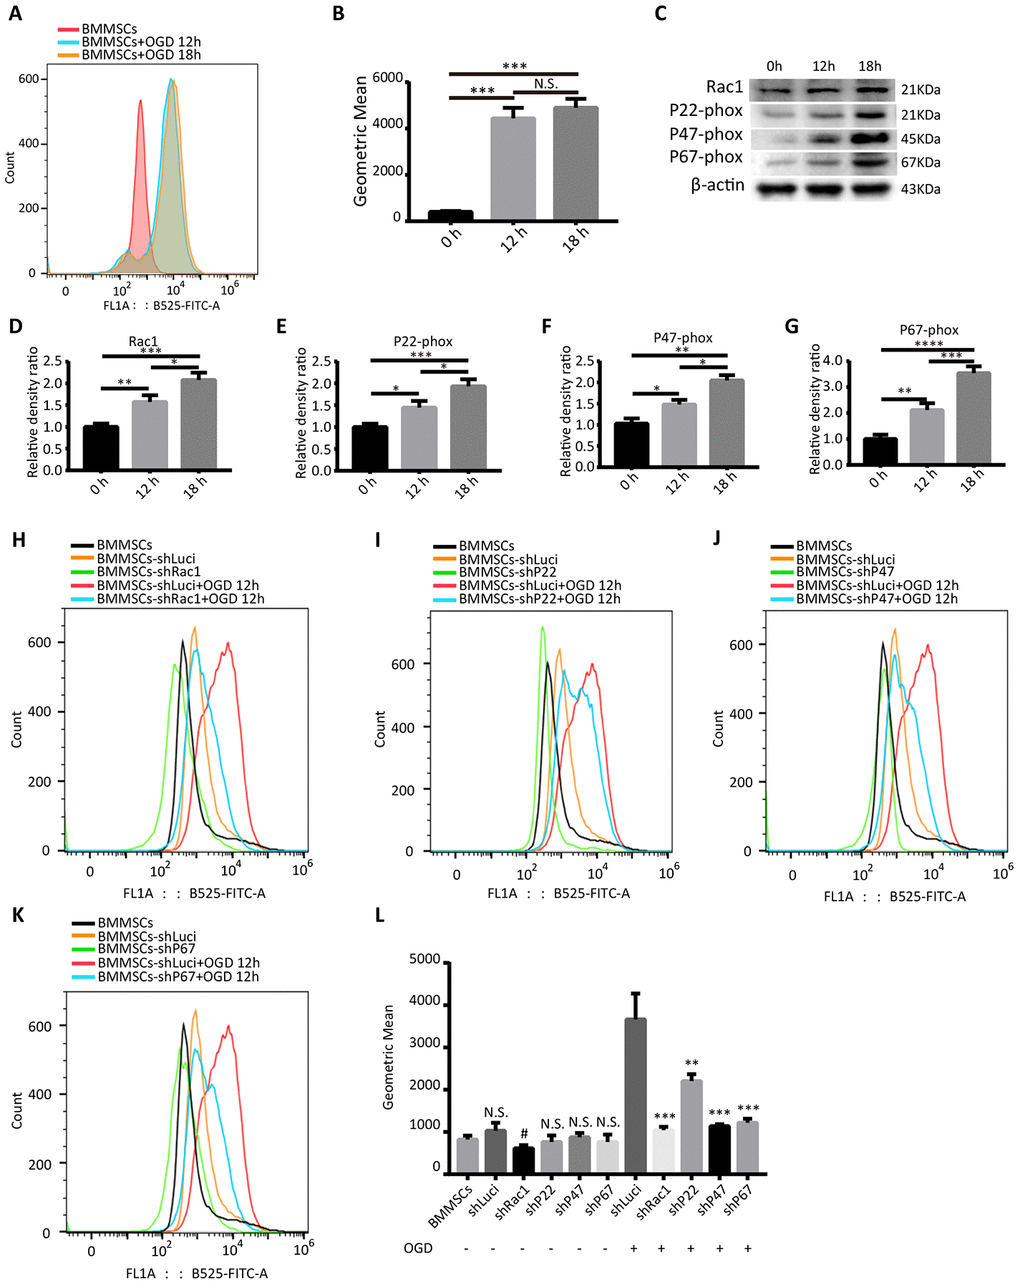 Silencing Rac1, p22-phox, p47-phox, or p67-phox reduces OGD-induced ROS production. (A) Intracellular ROS production, as measured by flow cytometry analysis of DCFH-DA probe fluorescence. (B) ROS production after 0 h, 12 h and 18 h OGD treatment. ROS production was notably increased after an OGD. (N.S. no significance, ***P C–G) Rac1, p22-phox, p47-phox, and p67-phox protein expressions in wild type BMMSCs after exposing to different durations of OGD (0 h, 12 h, or 18 h). (*P H–K) Representation of flow cytometric histograms of different transfected BMMSCs and parental BMMSCs with or without an OGD 12 h stimulation. (L) Statistical graph showing ROS production of different BMMSCs cell lines under different hypoxia stimulation conditions. In comparison to shLuci, the other lentiviruses showed reduced ROS production to varying degrees. (N.S. no significance versus BMMSCs group, #P 